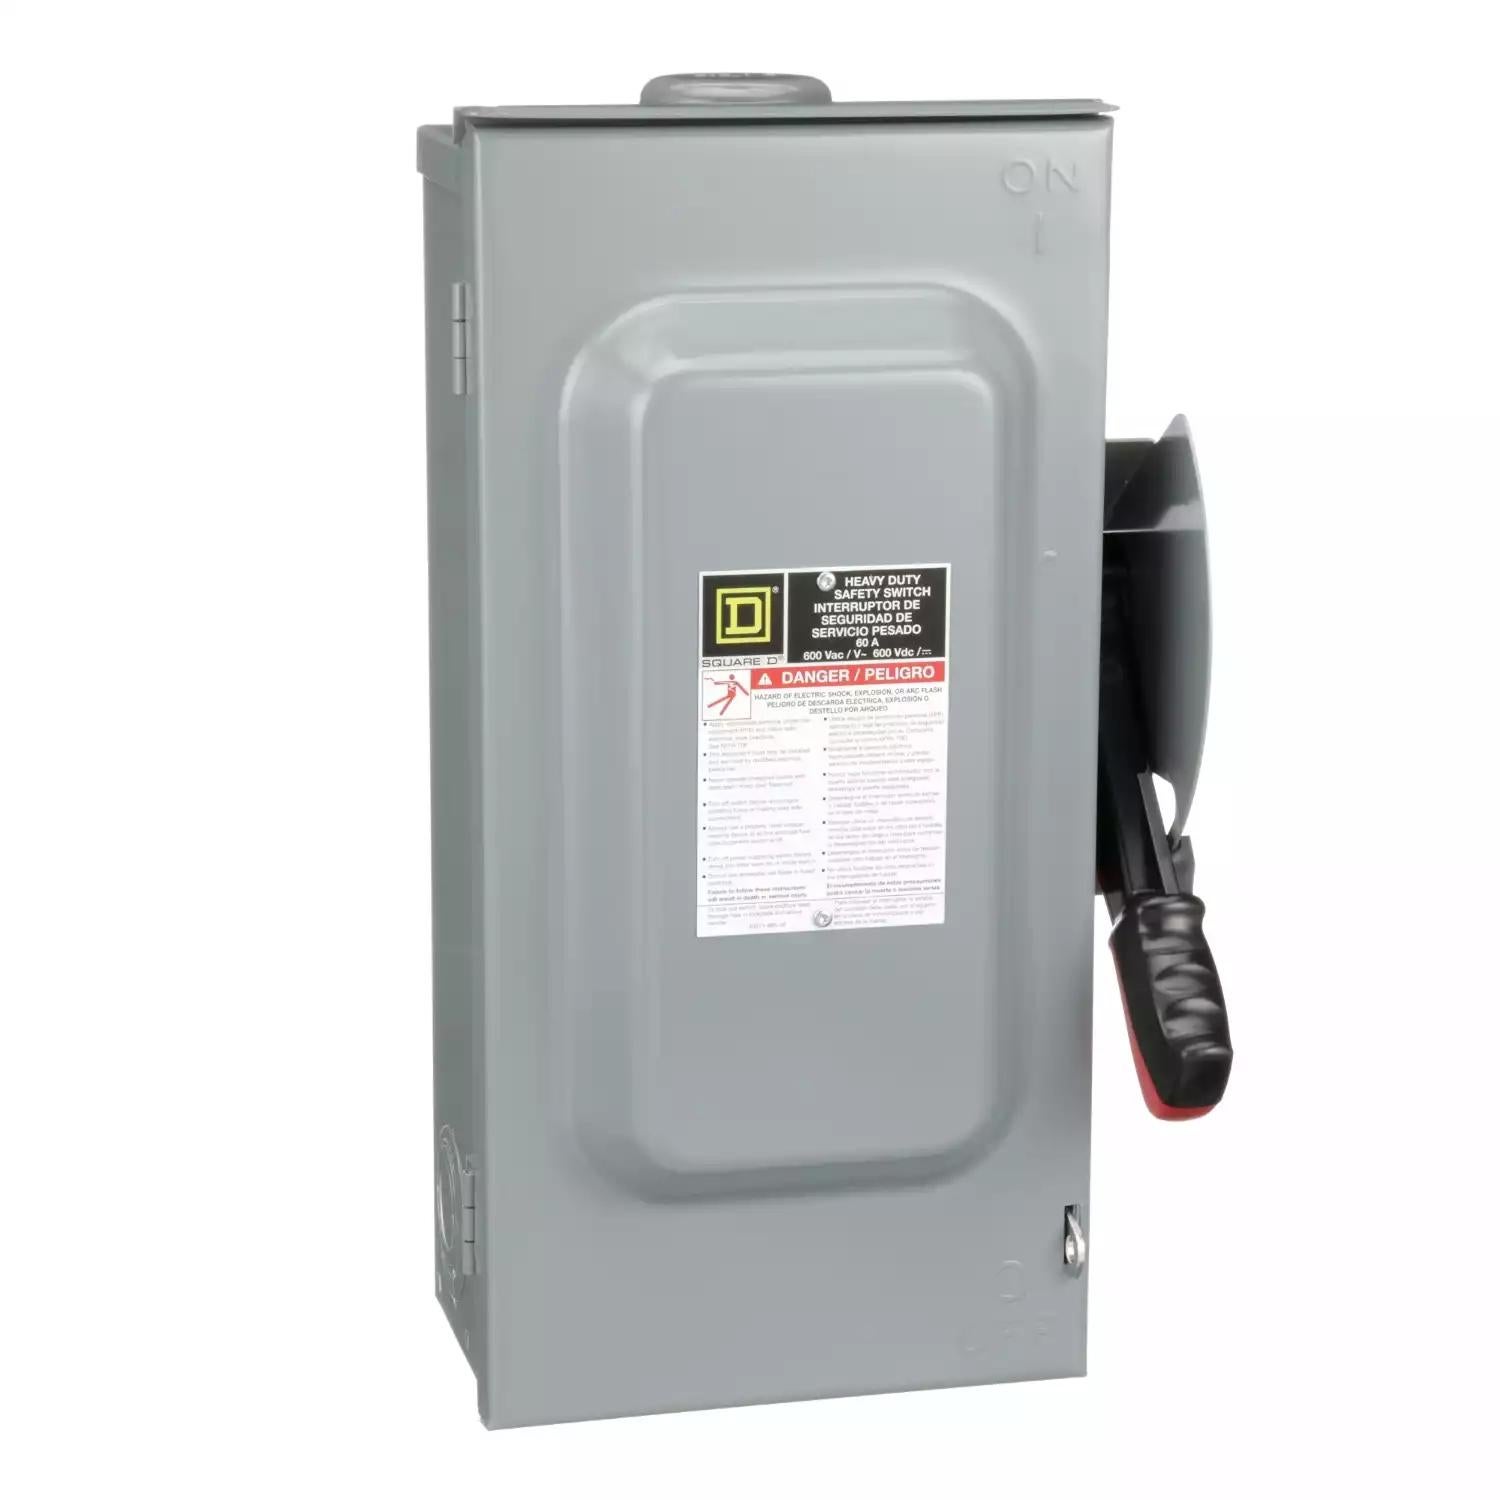 Safety switch, heavy duty, fusible, 60A, 3 wire, 3 poles, 50hp, 600VAC/DC, Type 3R, bolt on hub provision